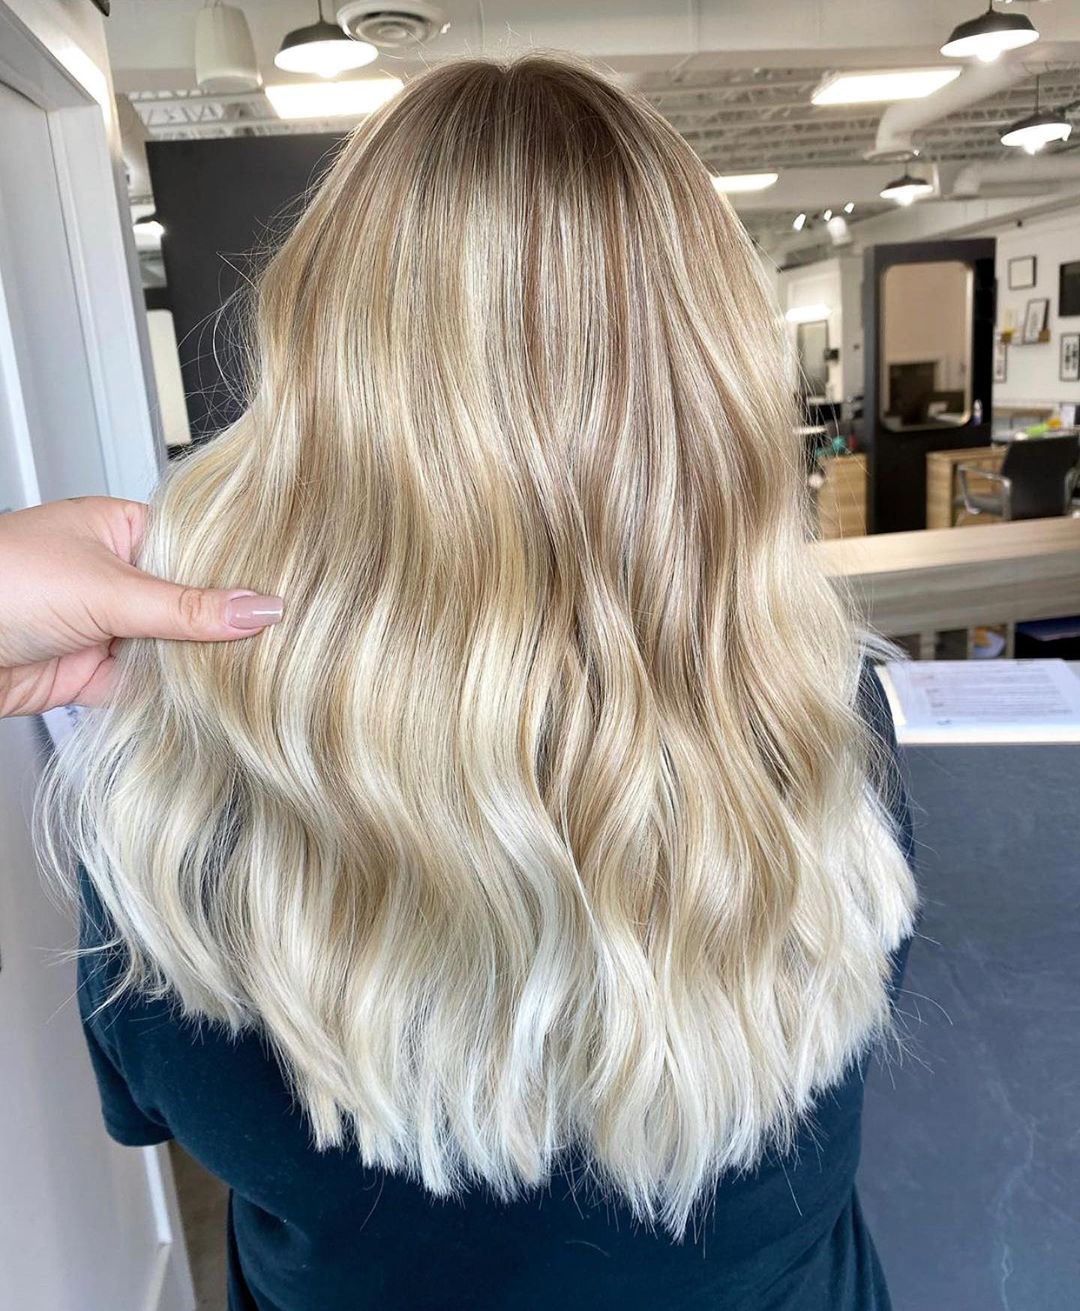 19 Examples That Prove White Blonde Hair Is In for 2021